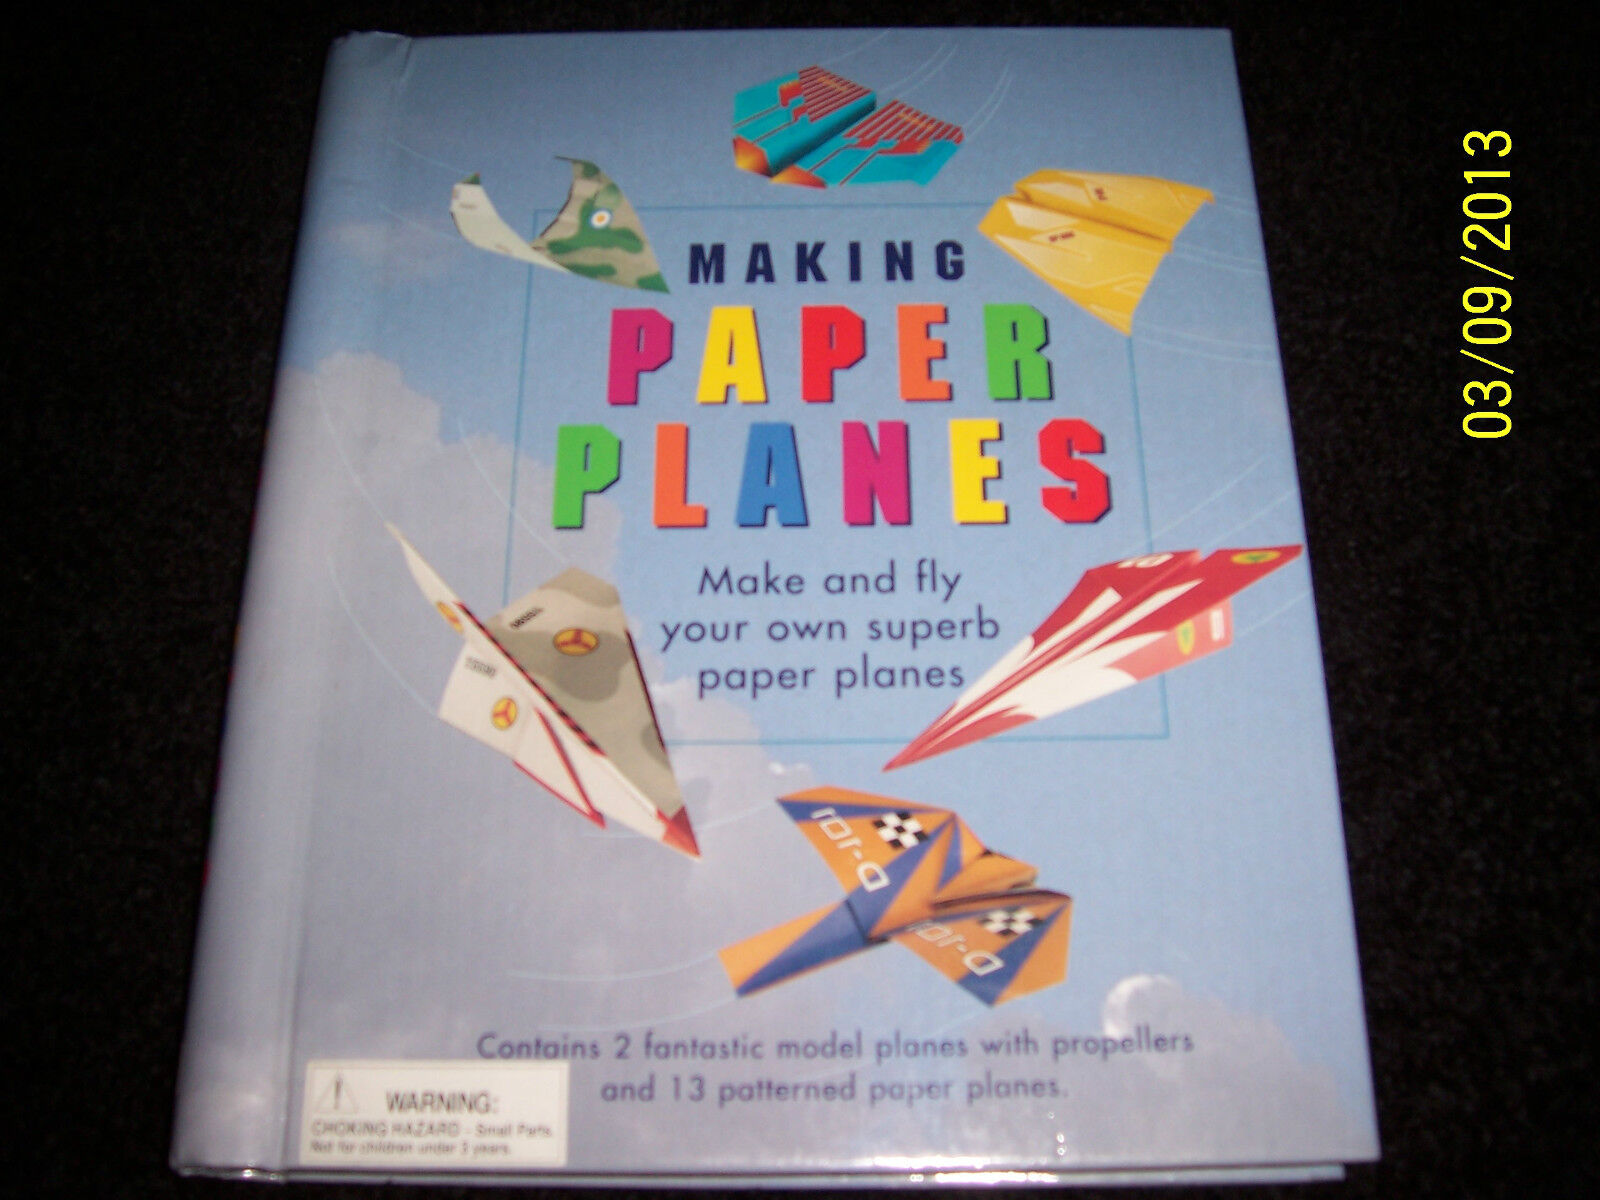 MAKING PAPER PLANES MAKE AND FLY YOUR OWN SUPERB PAPER PLANES GREAT GIFT